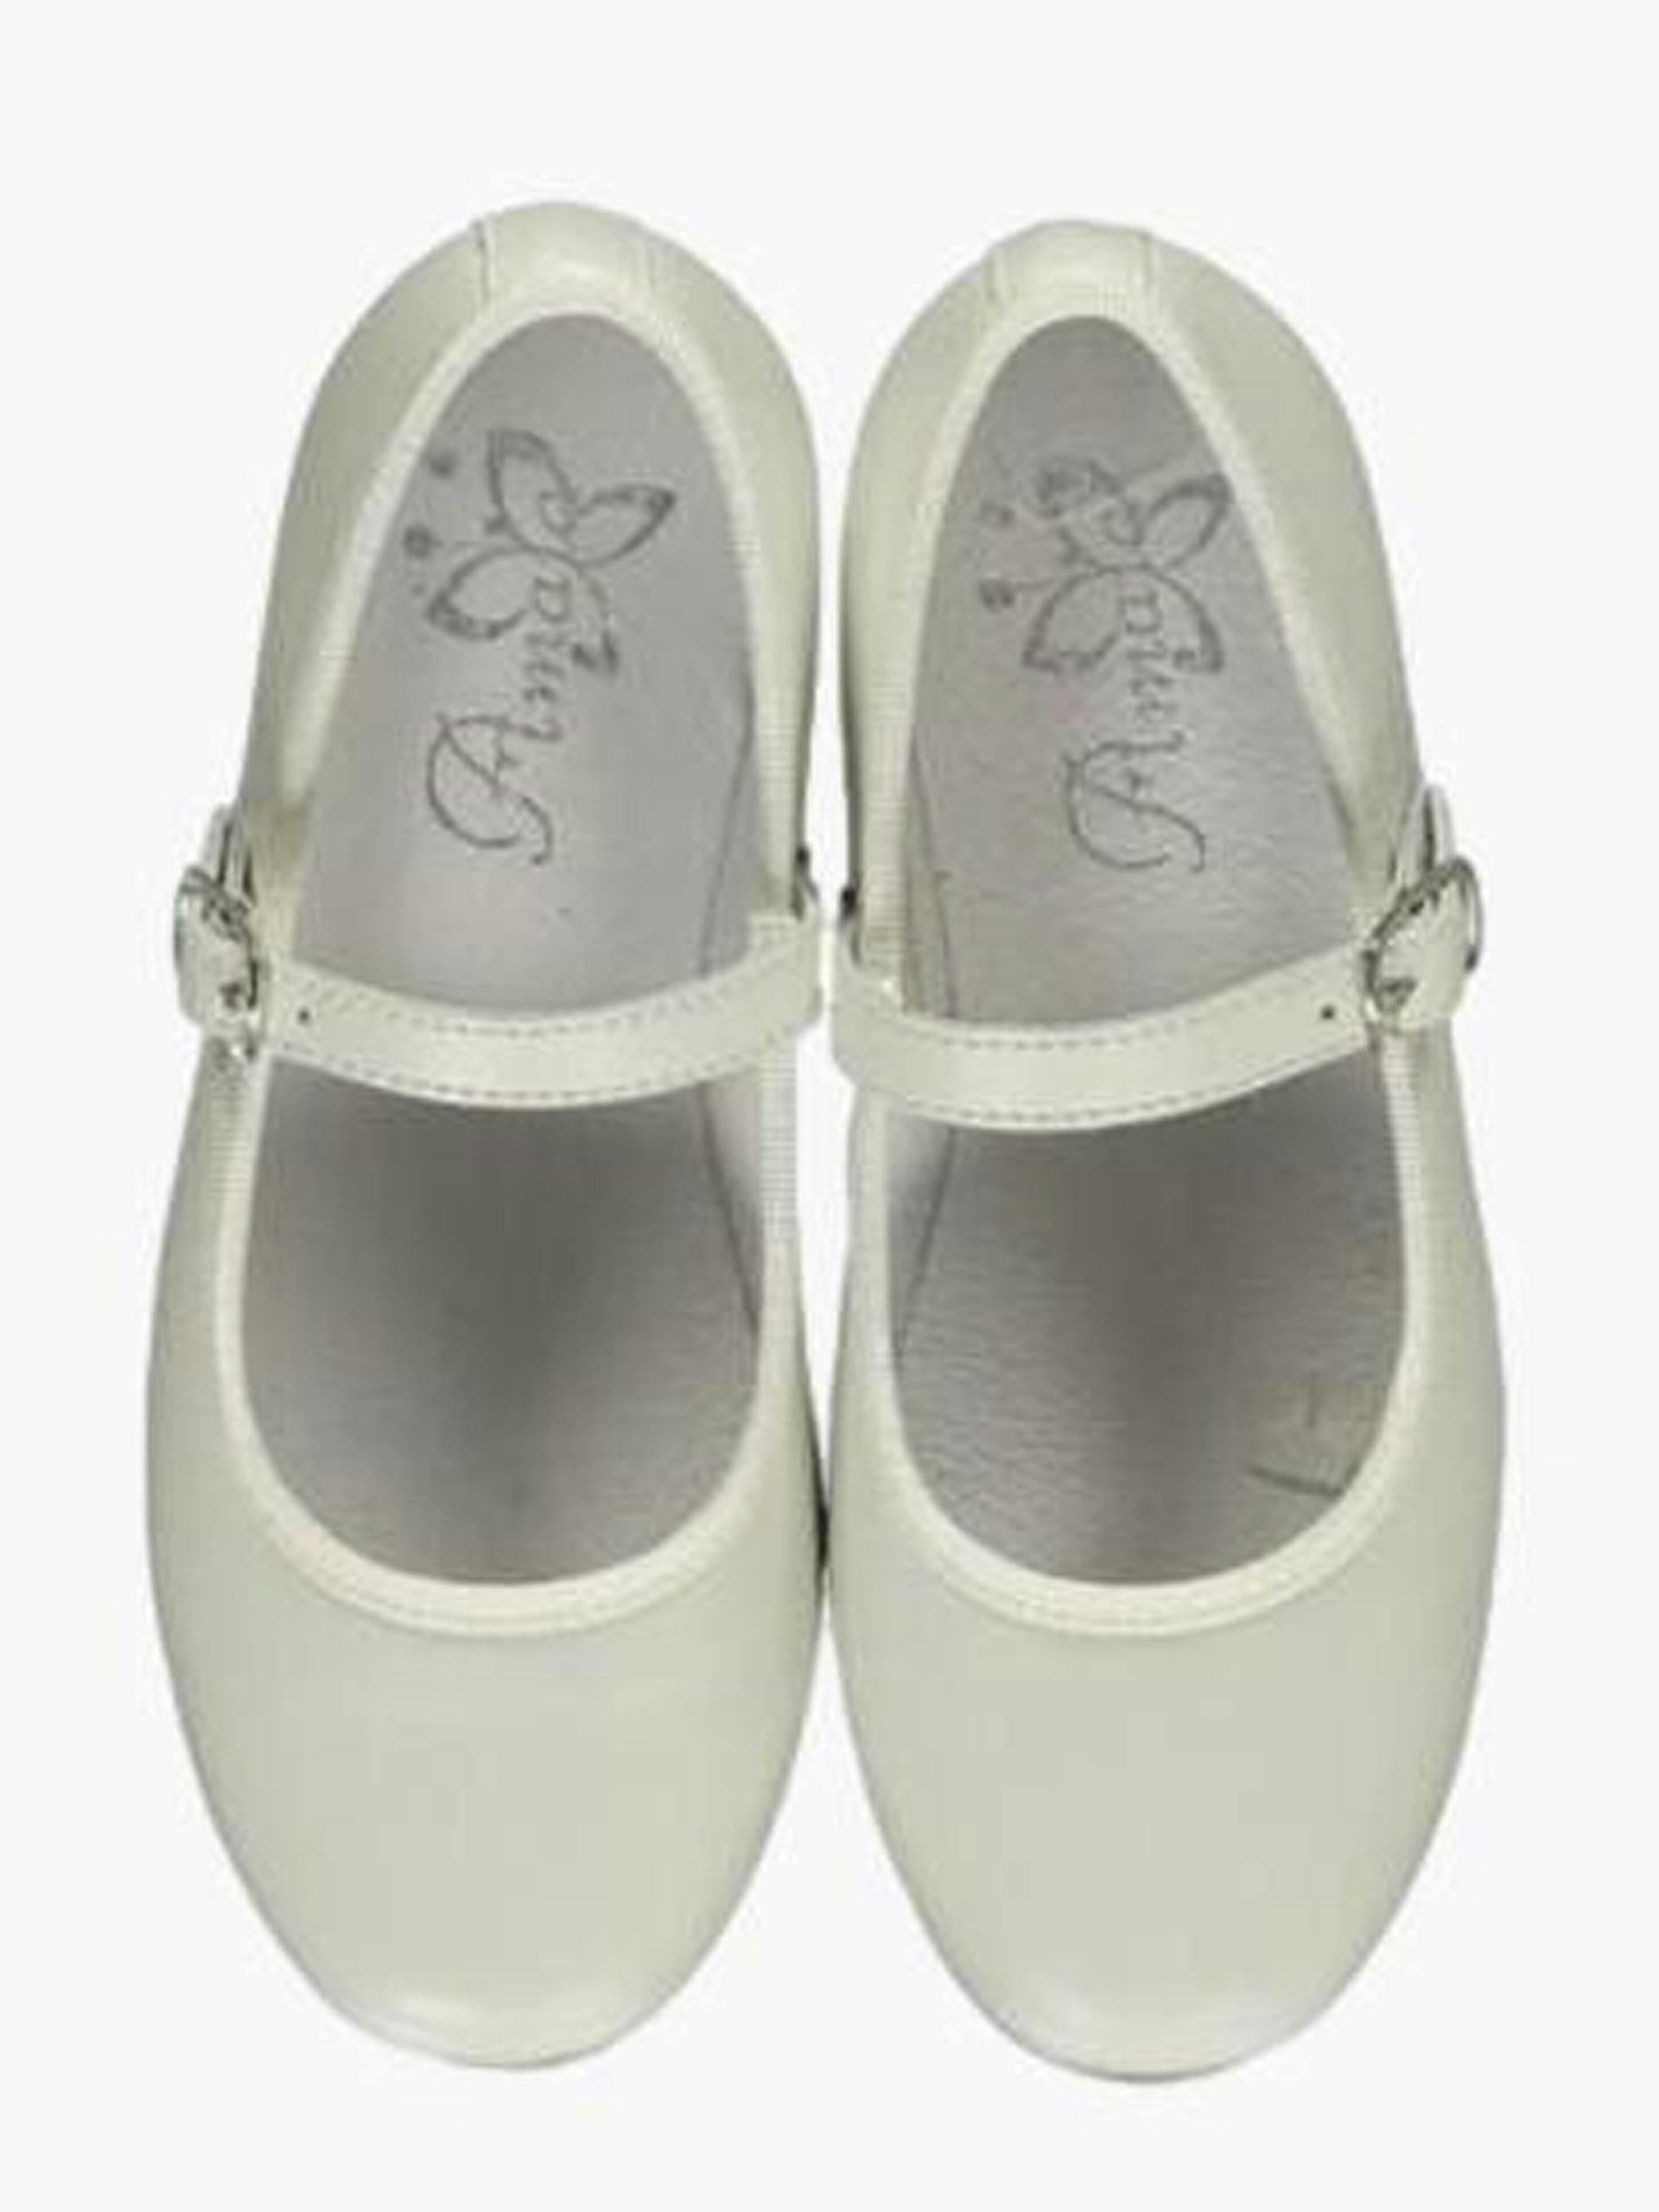 Ivory leather Mary Jane girl's shoes